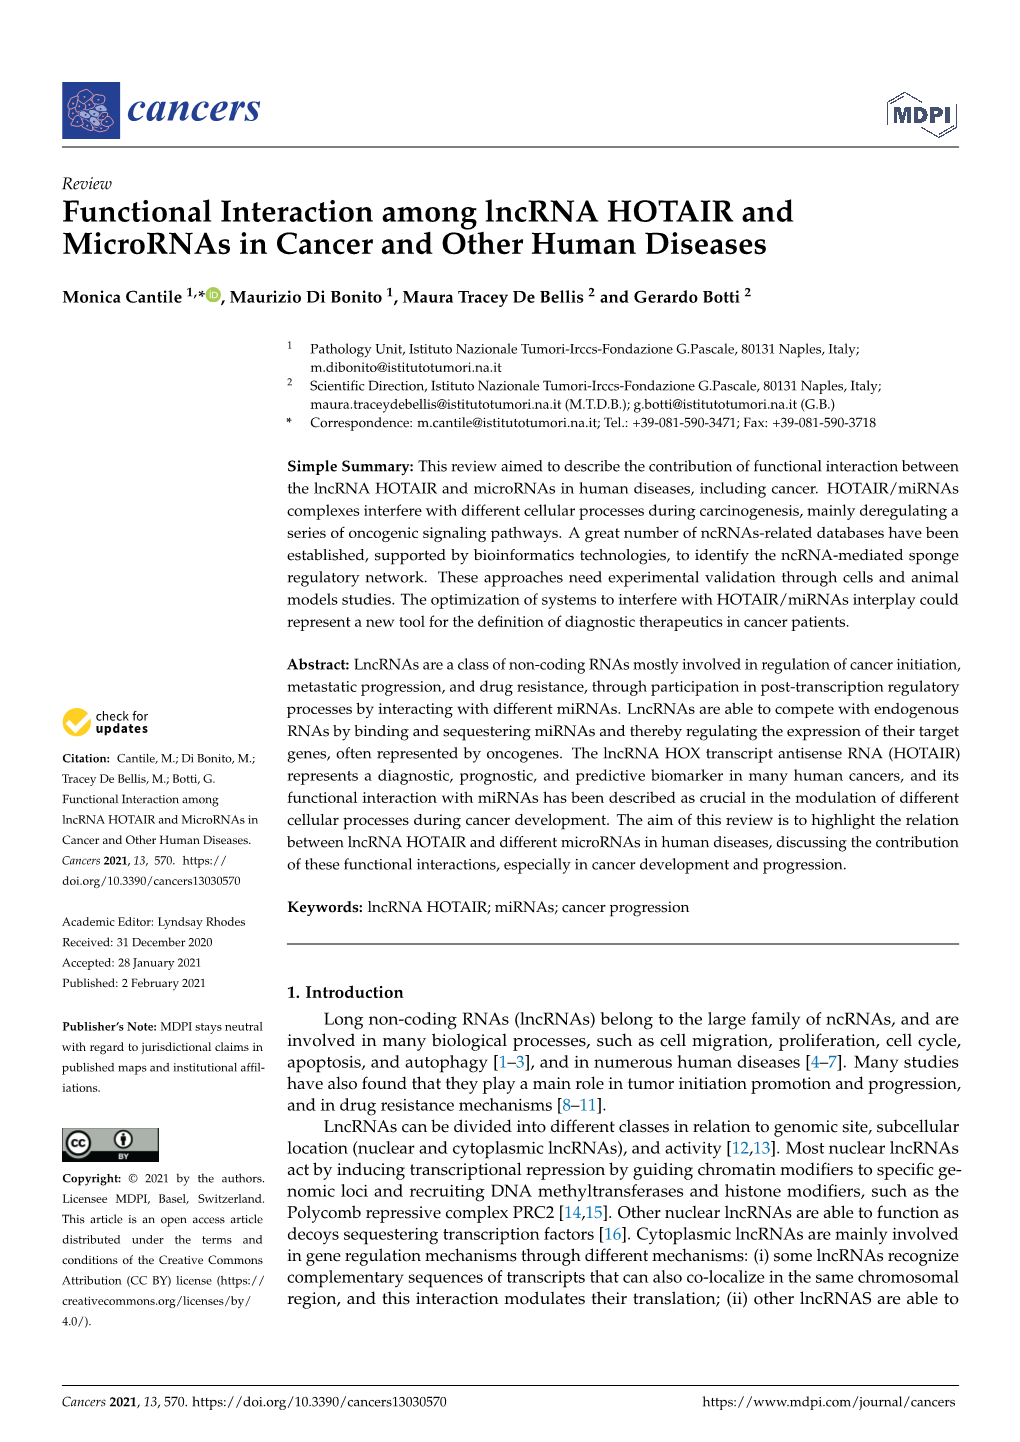 Functional Interaction Among Lncrna HOTAIR and Micrornas in Cancer and Other Human Diseases